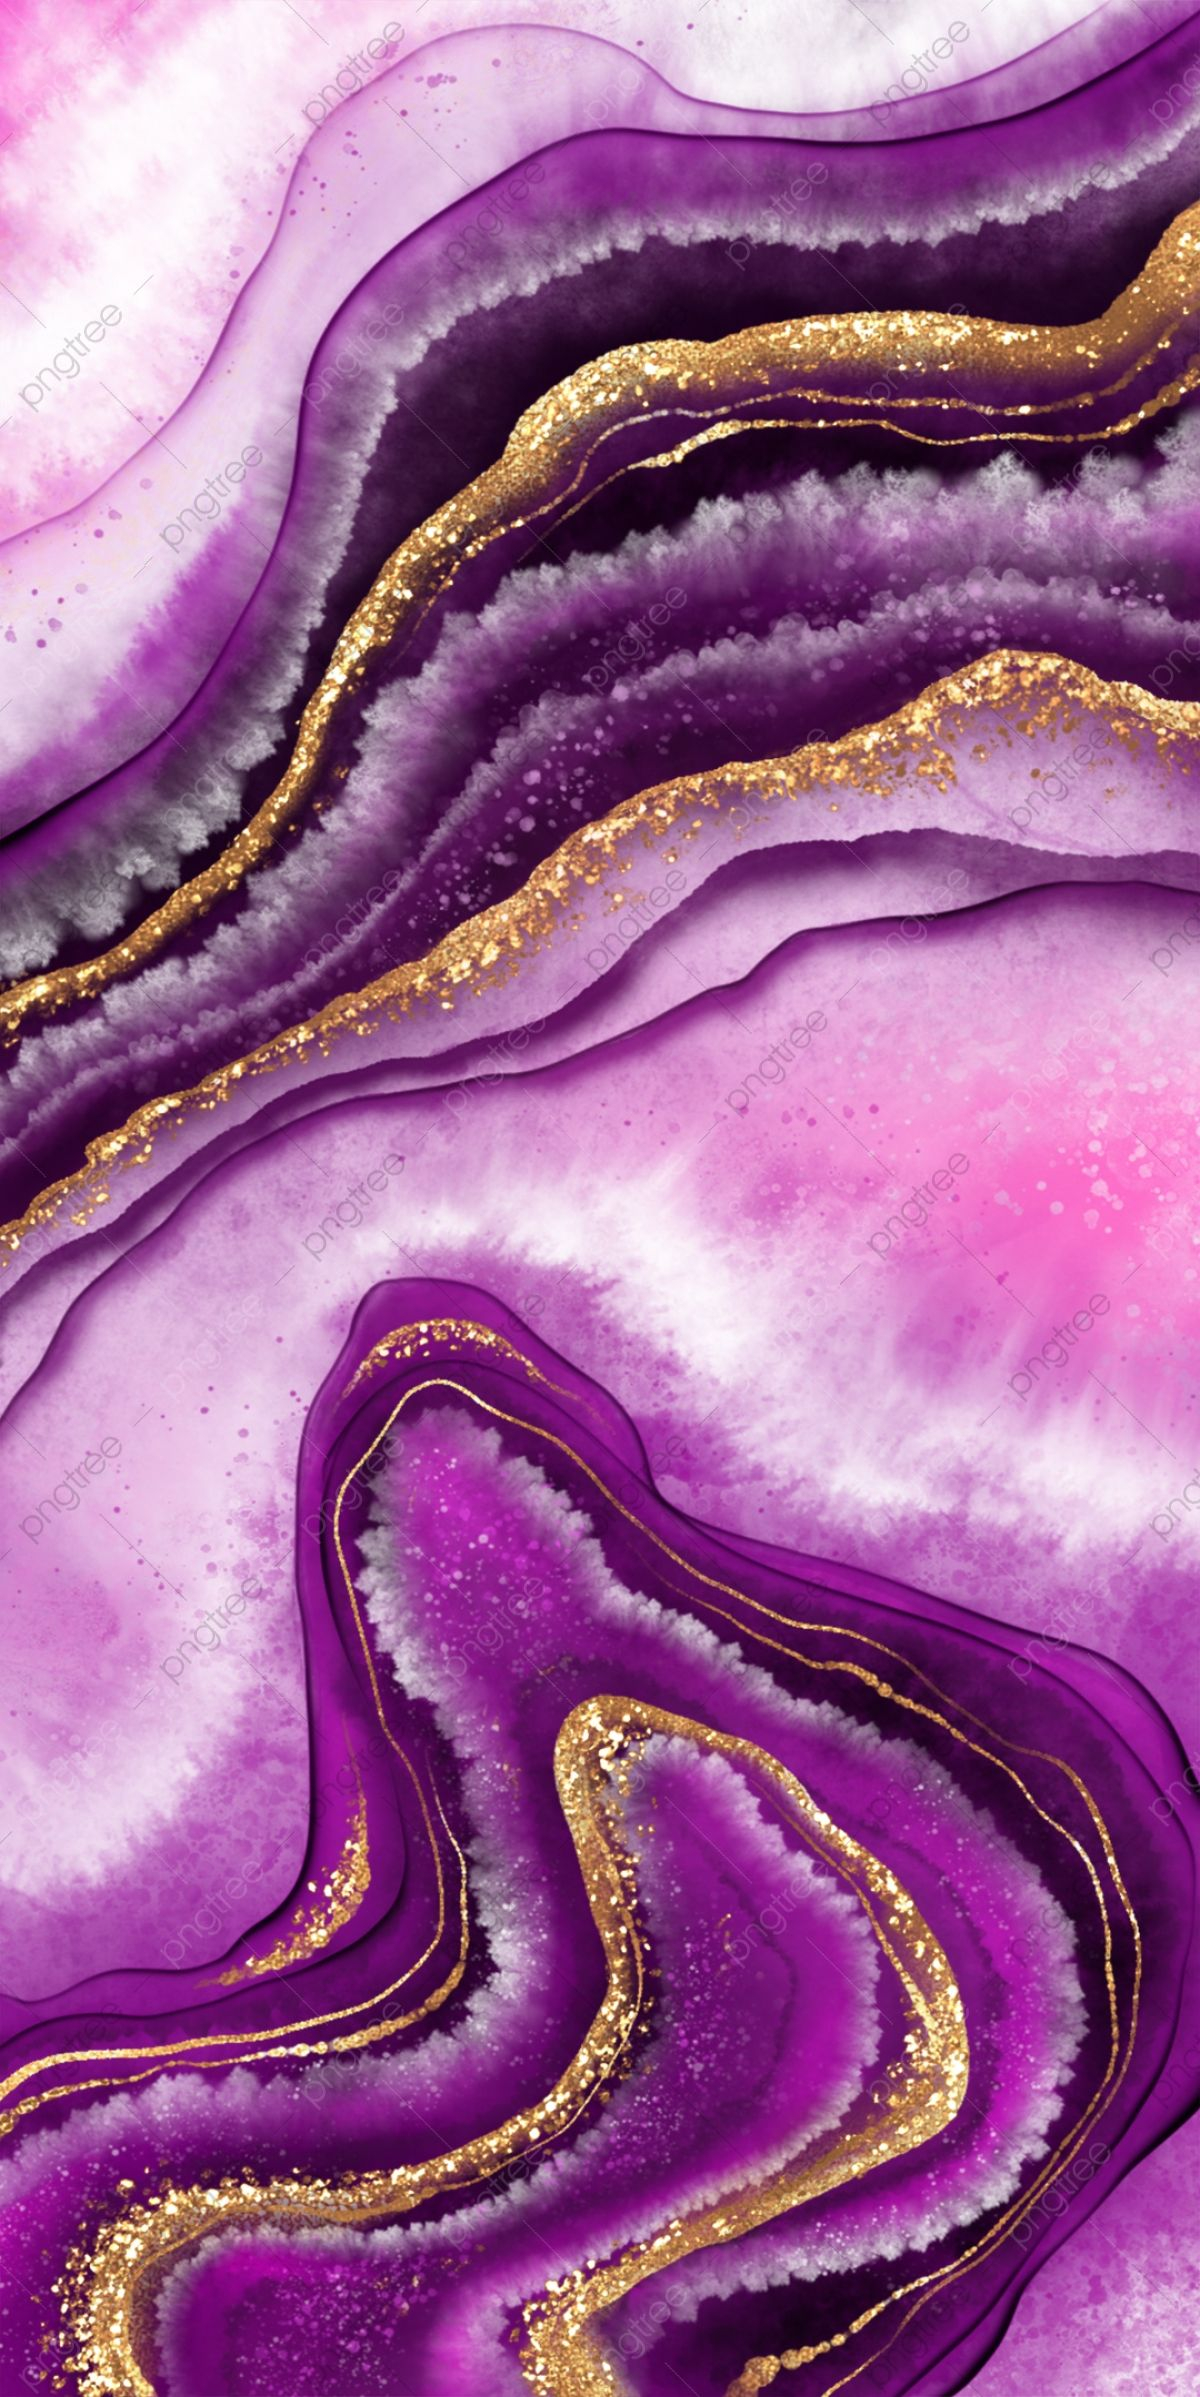 1200x2397 Purple Marble Background With Gold Streaks | Marble iphone wallpaper, Purple wallpaper, Purple wallpaper iphone